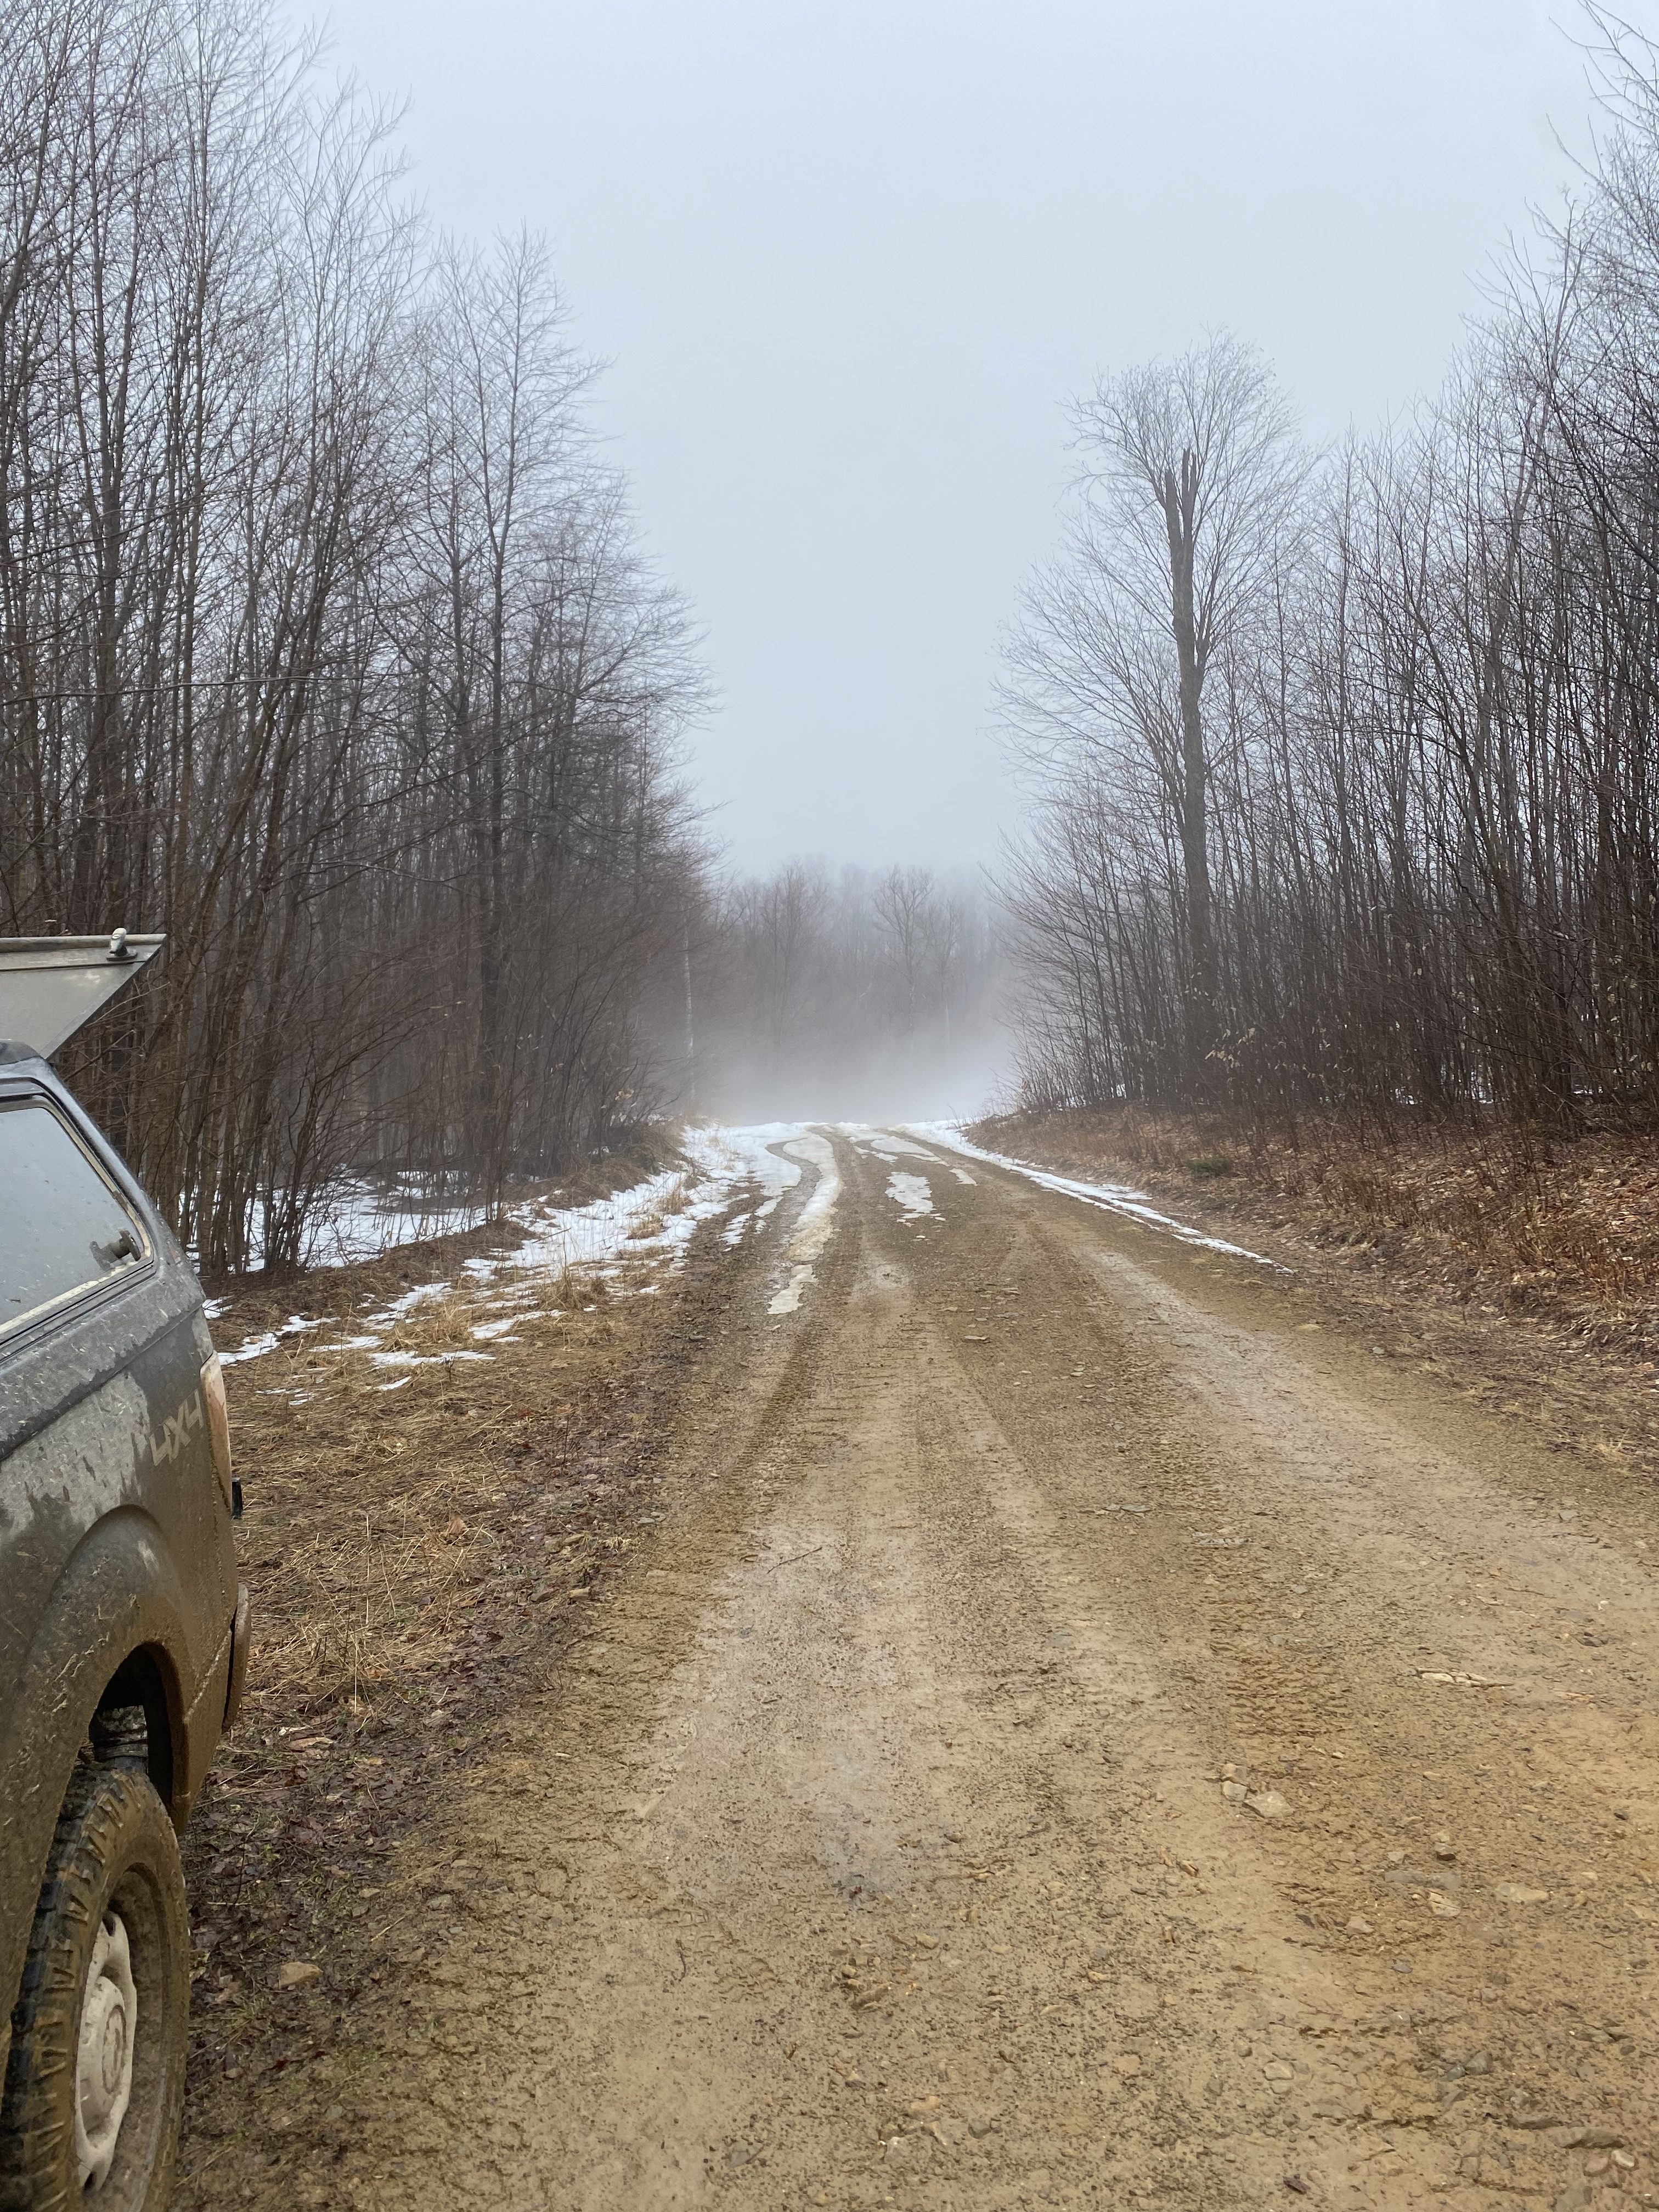 Dirt road with snow fog in the distance